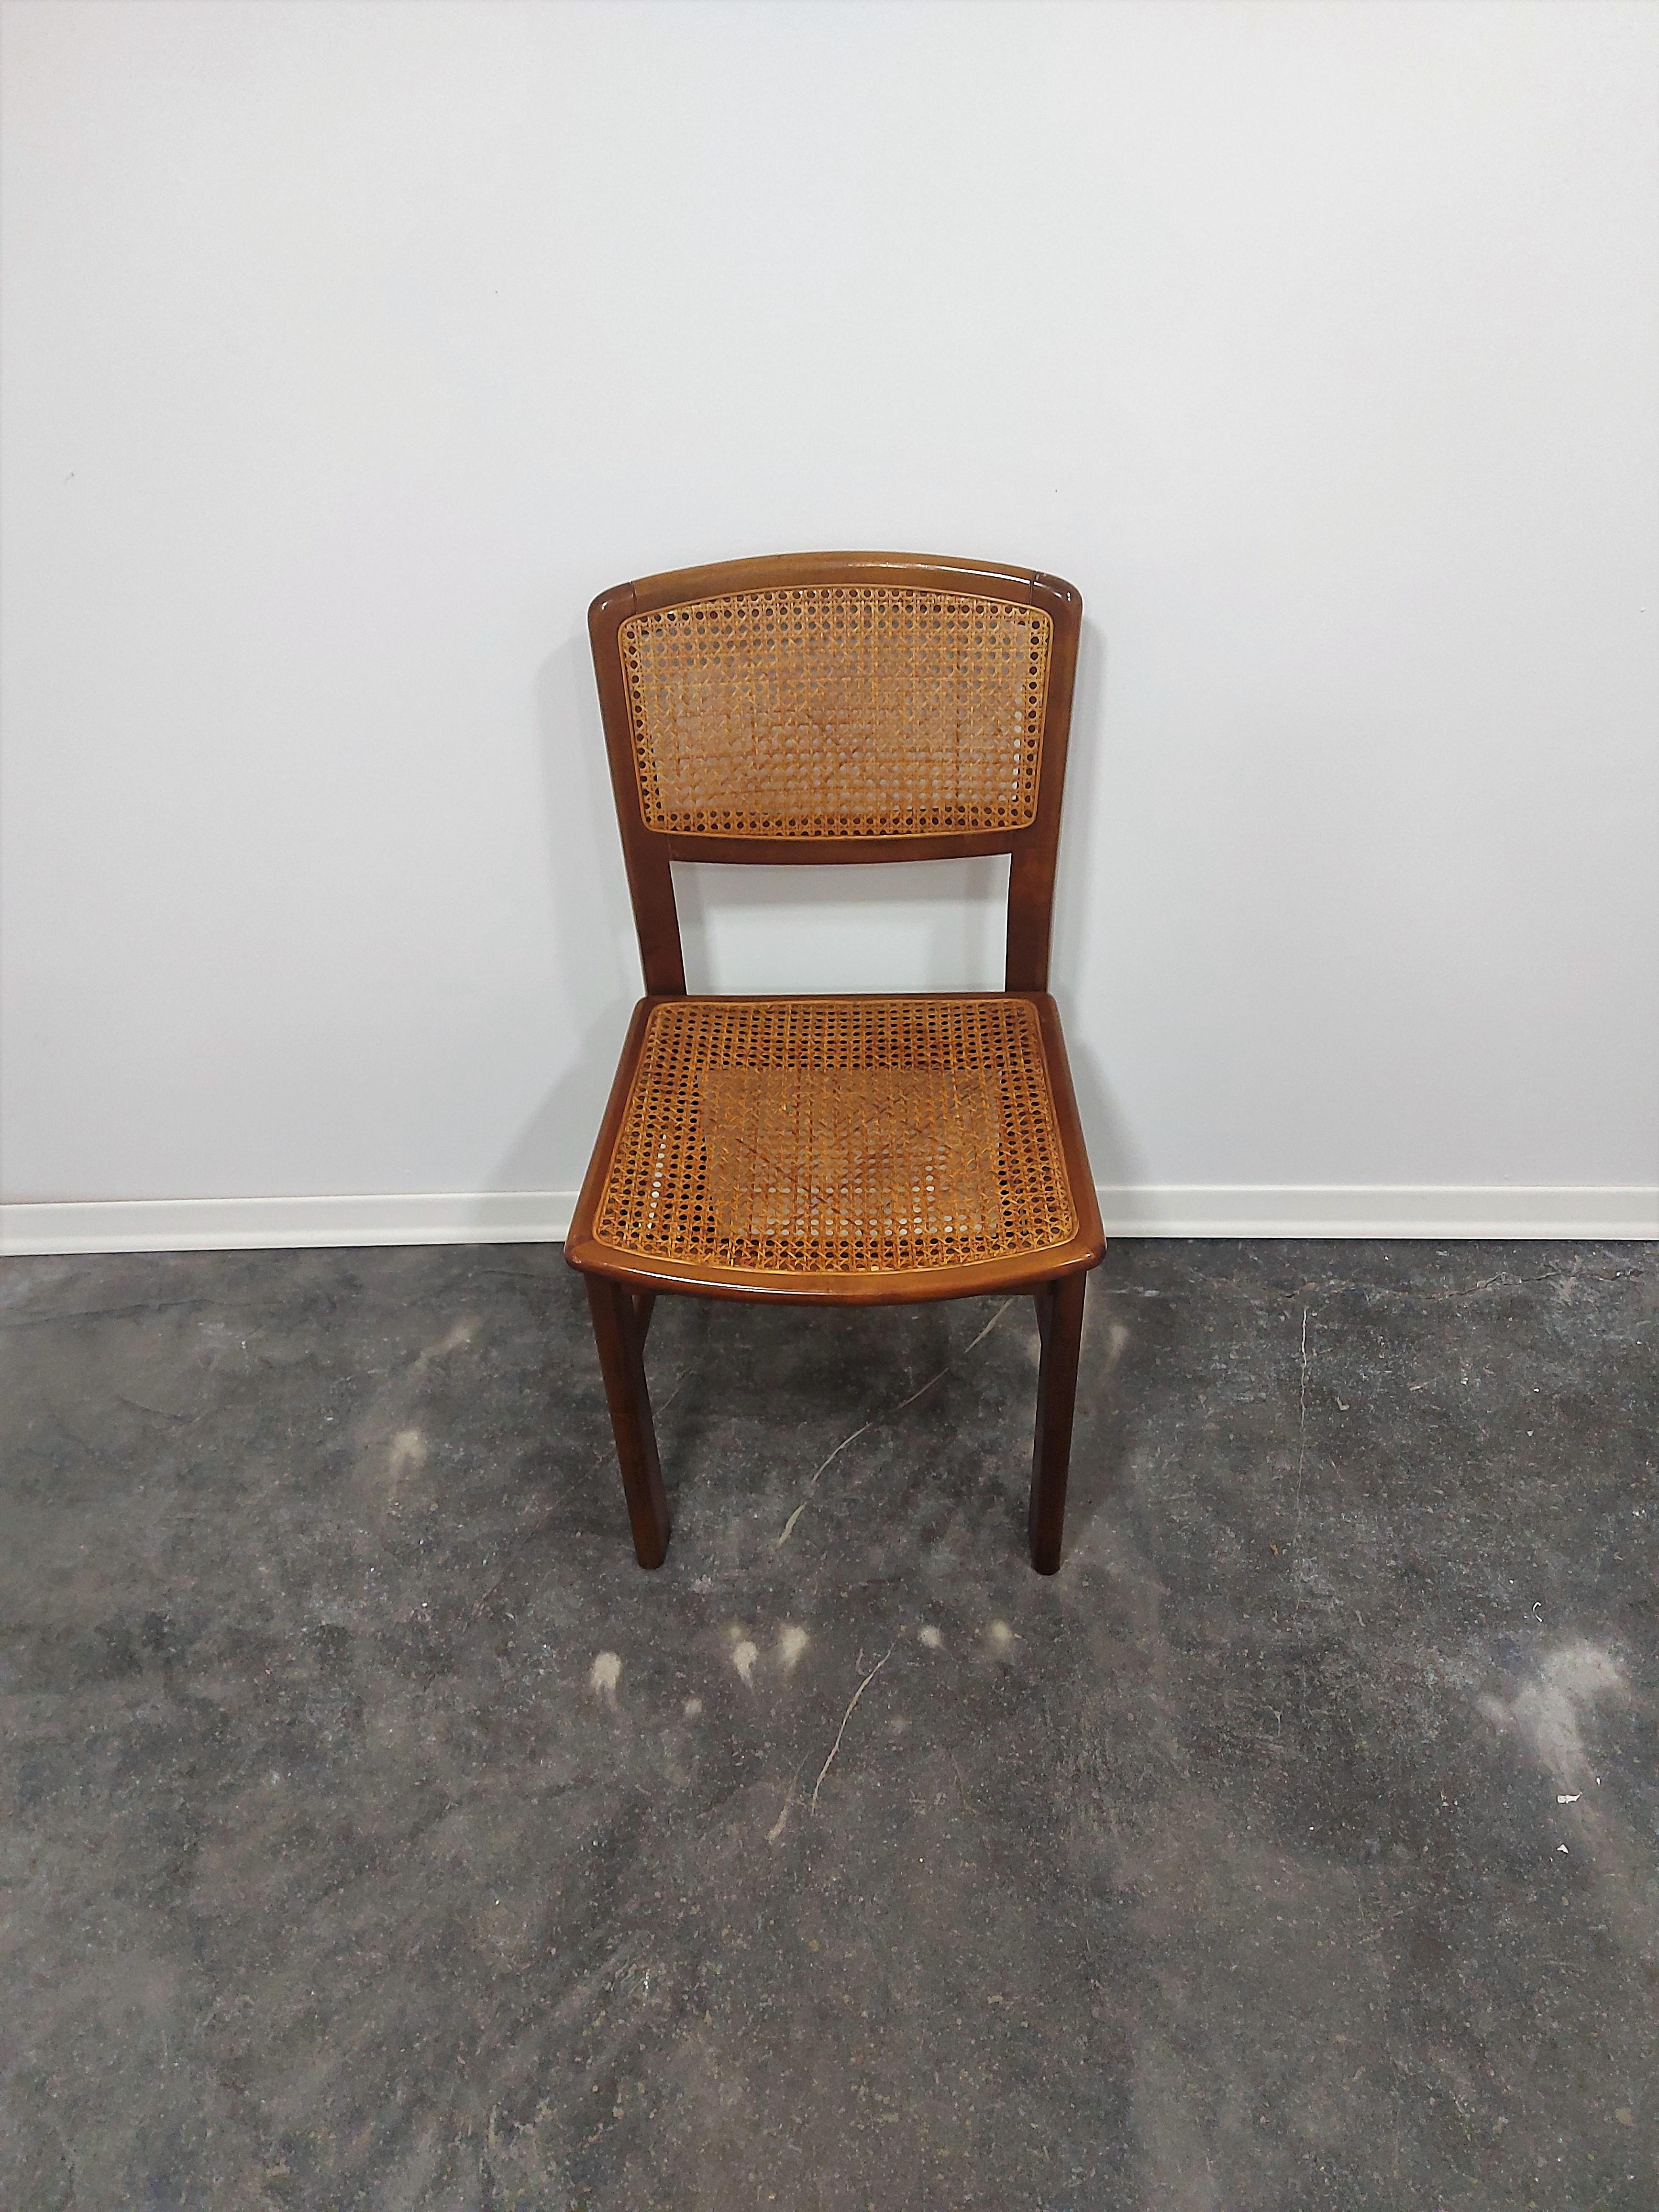 Vintage Dining Chairs

Period: 1970s

Country of manufacturer: Italy

Style: modern, classic

Materials: wood, cane webbing

Dimensions: H=85cm, W=45,50cm, D=51cm, Seat height=43cm.